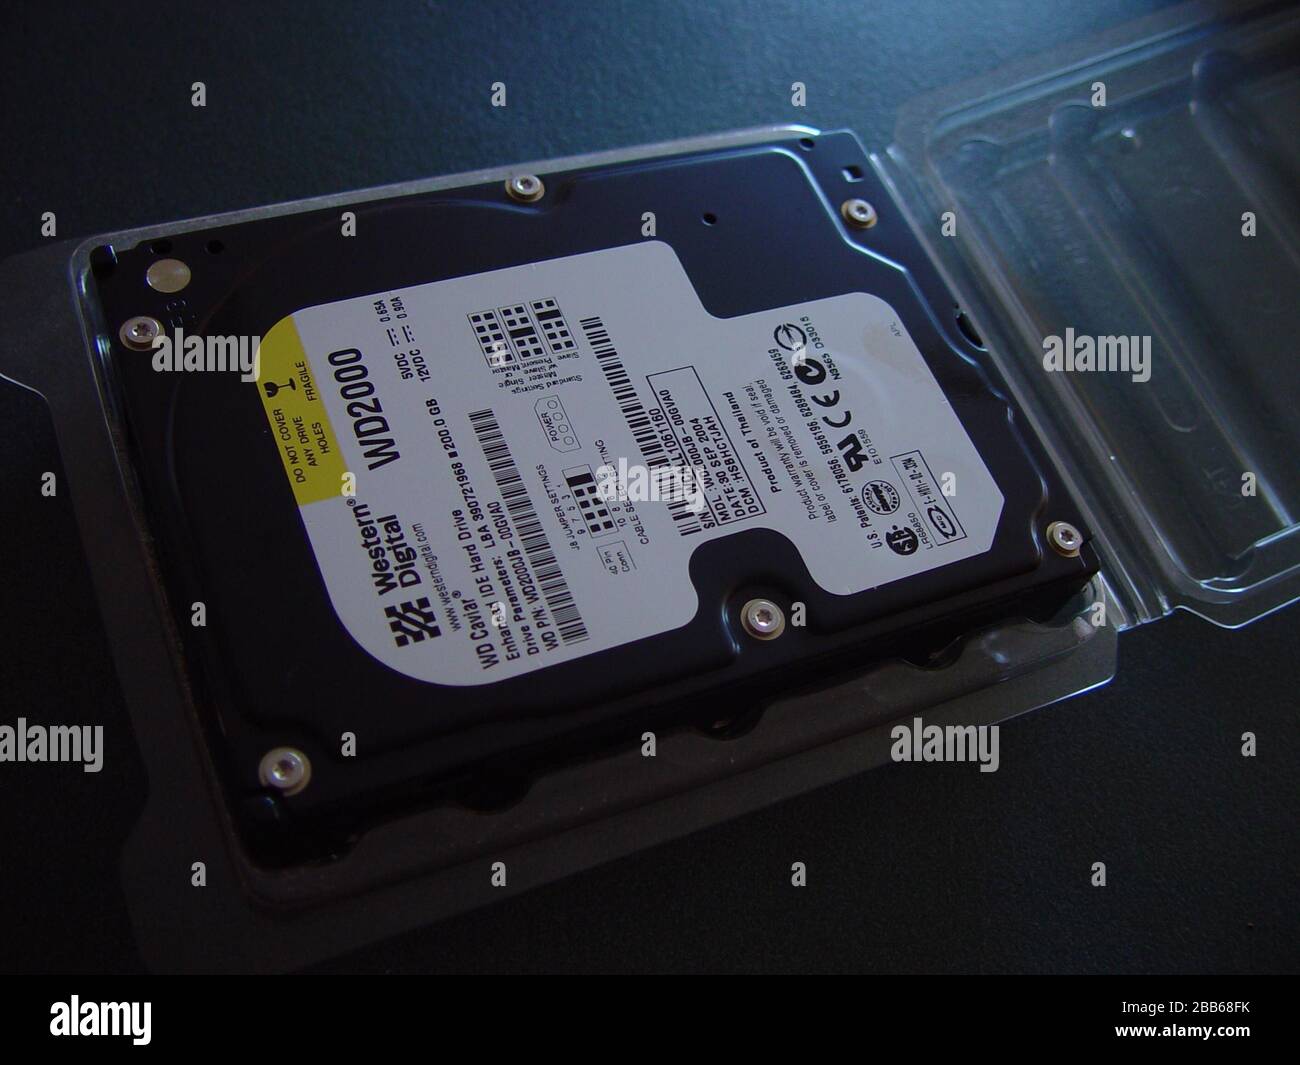 English: Image title: Western Digital 200GB 7200rpm IDE hard disk drive  WD2000 Image from Public domain images website,  http://www.public-domain-image.com/full-image/objects-public-domain-images-pictures/electronics-devices-public-domain-images  ...